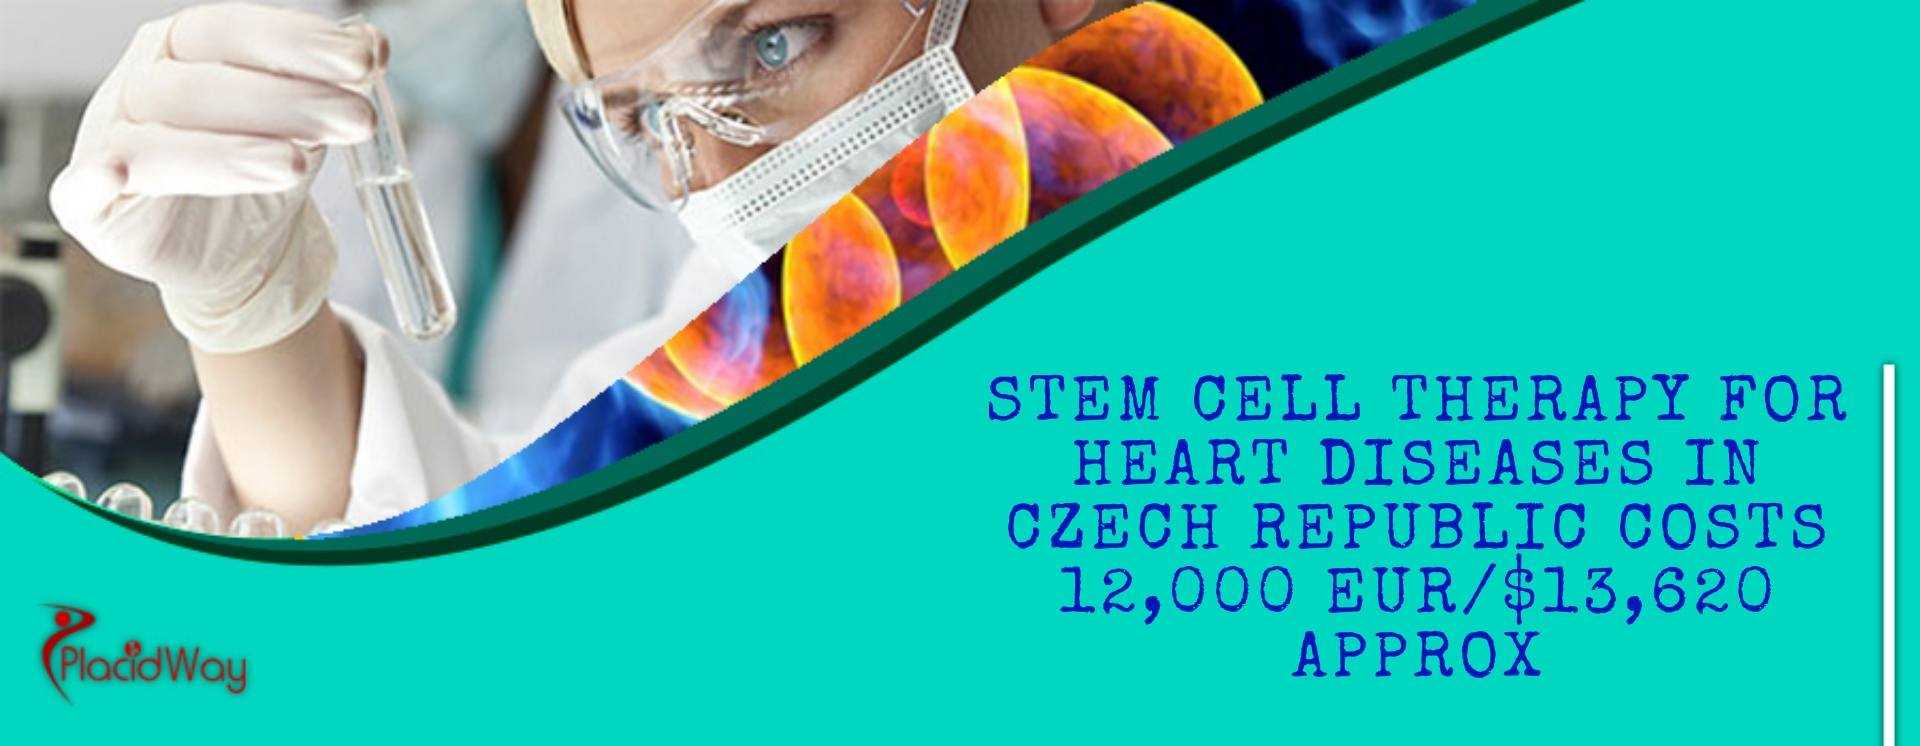 Stem Cell Therapy for Heart Diseases in Czech Republic